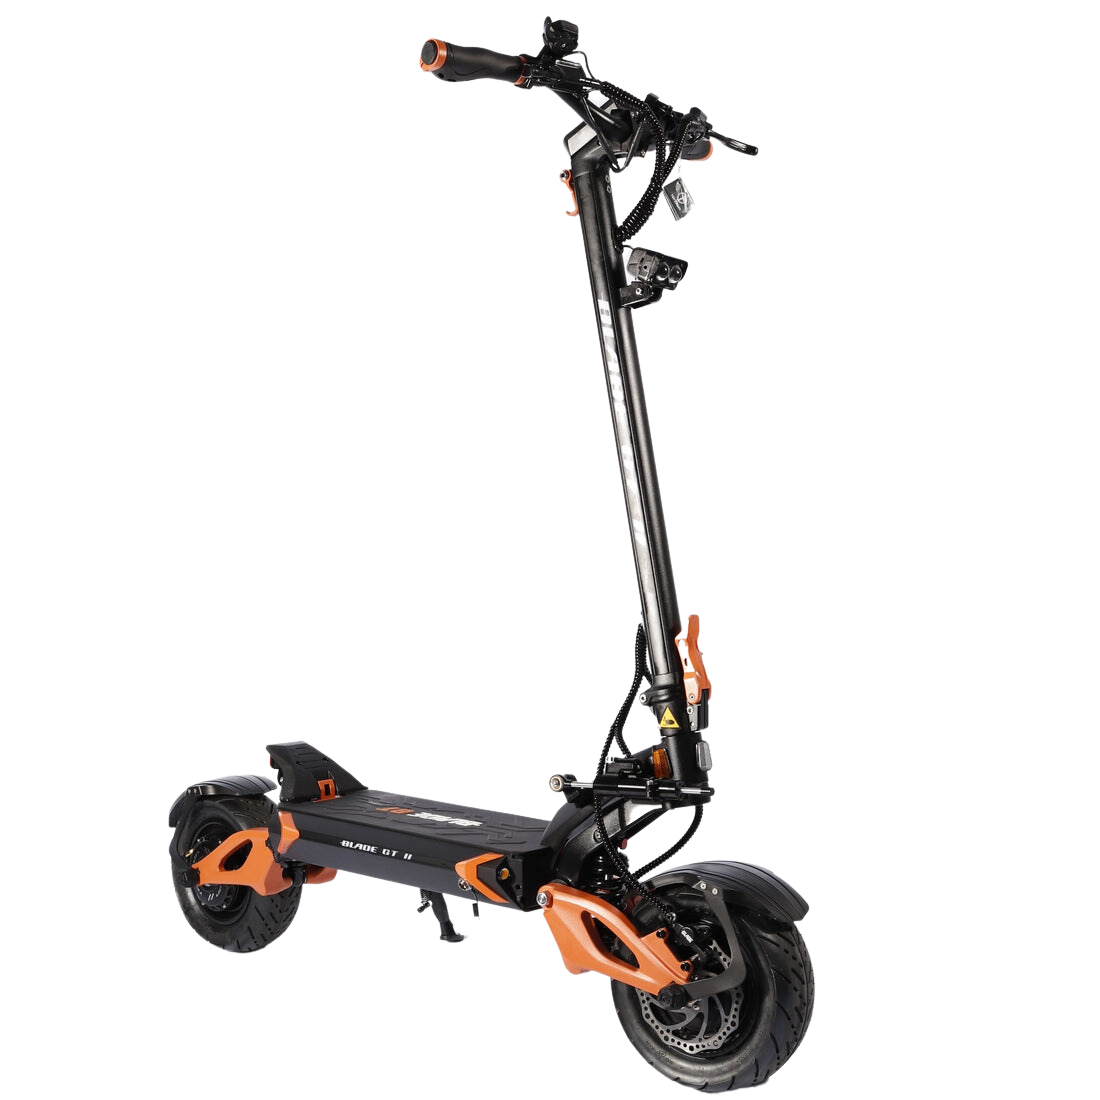 BLADE GT II Electric Scooter